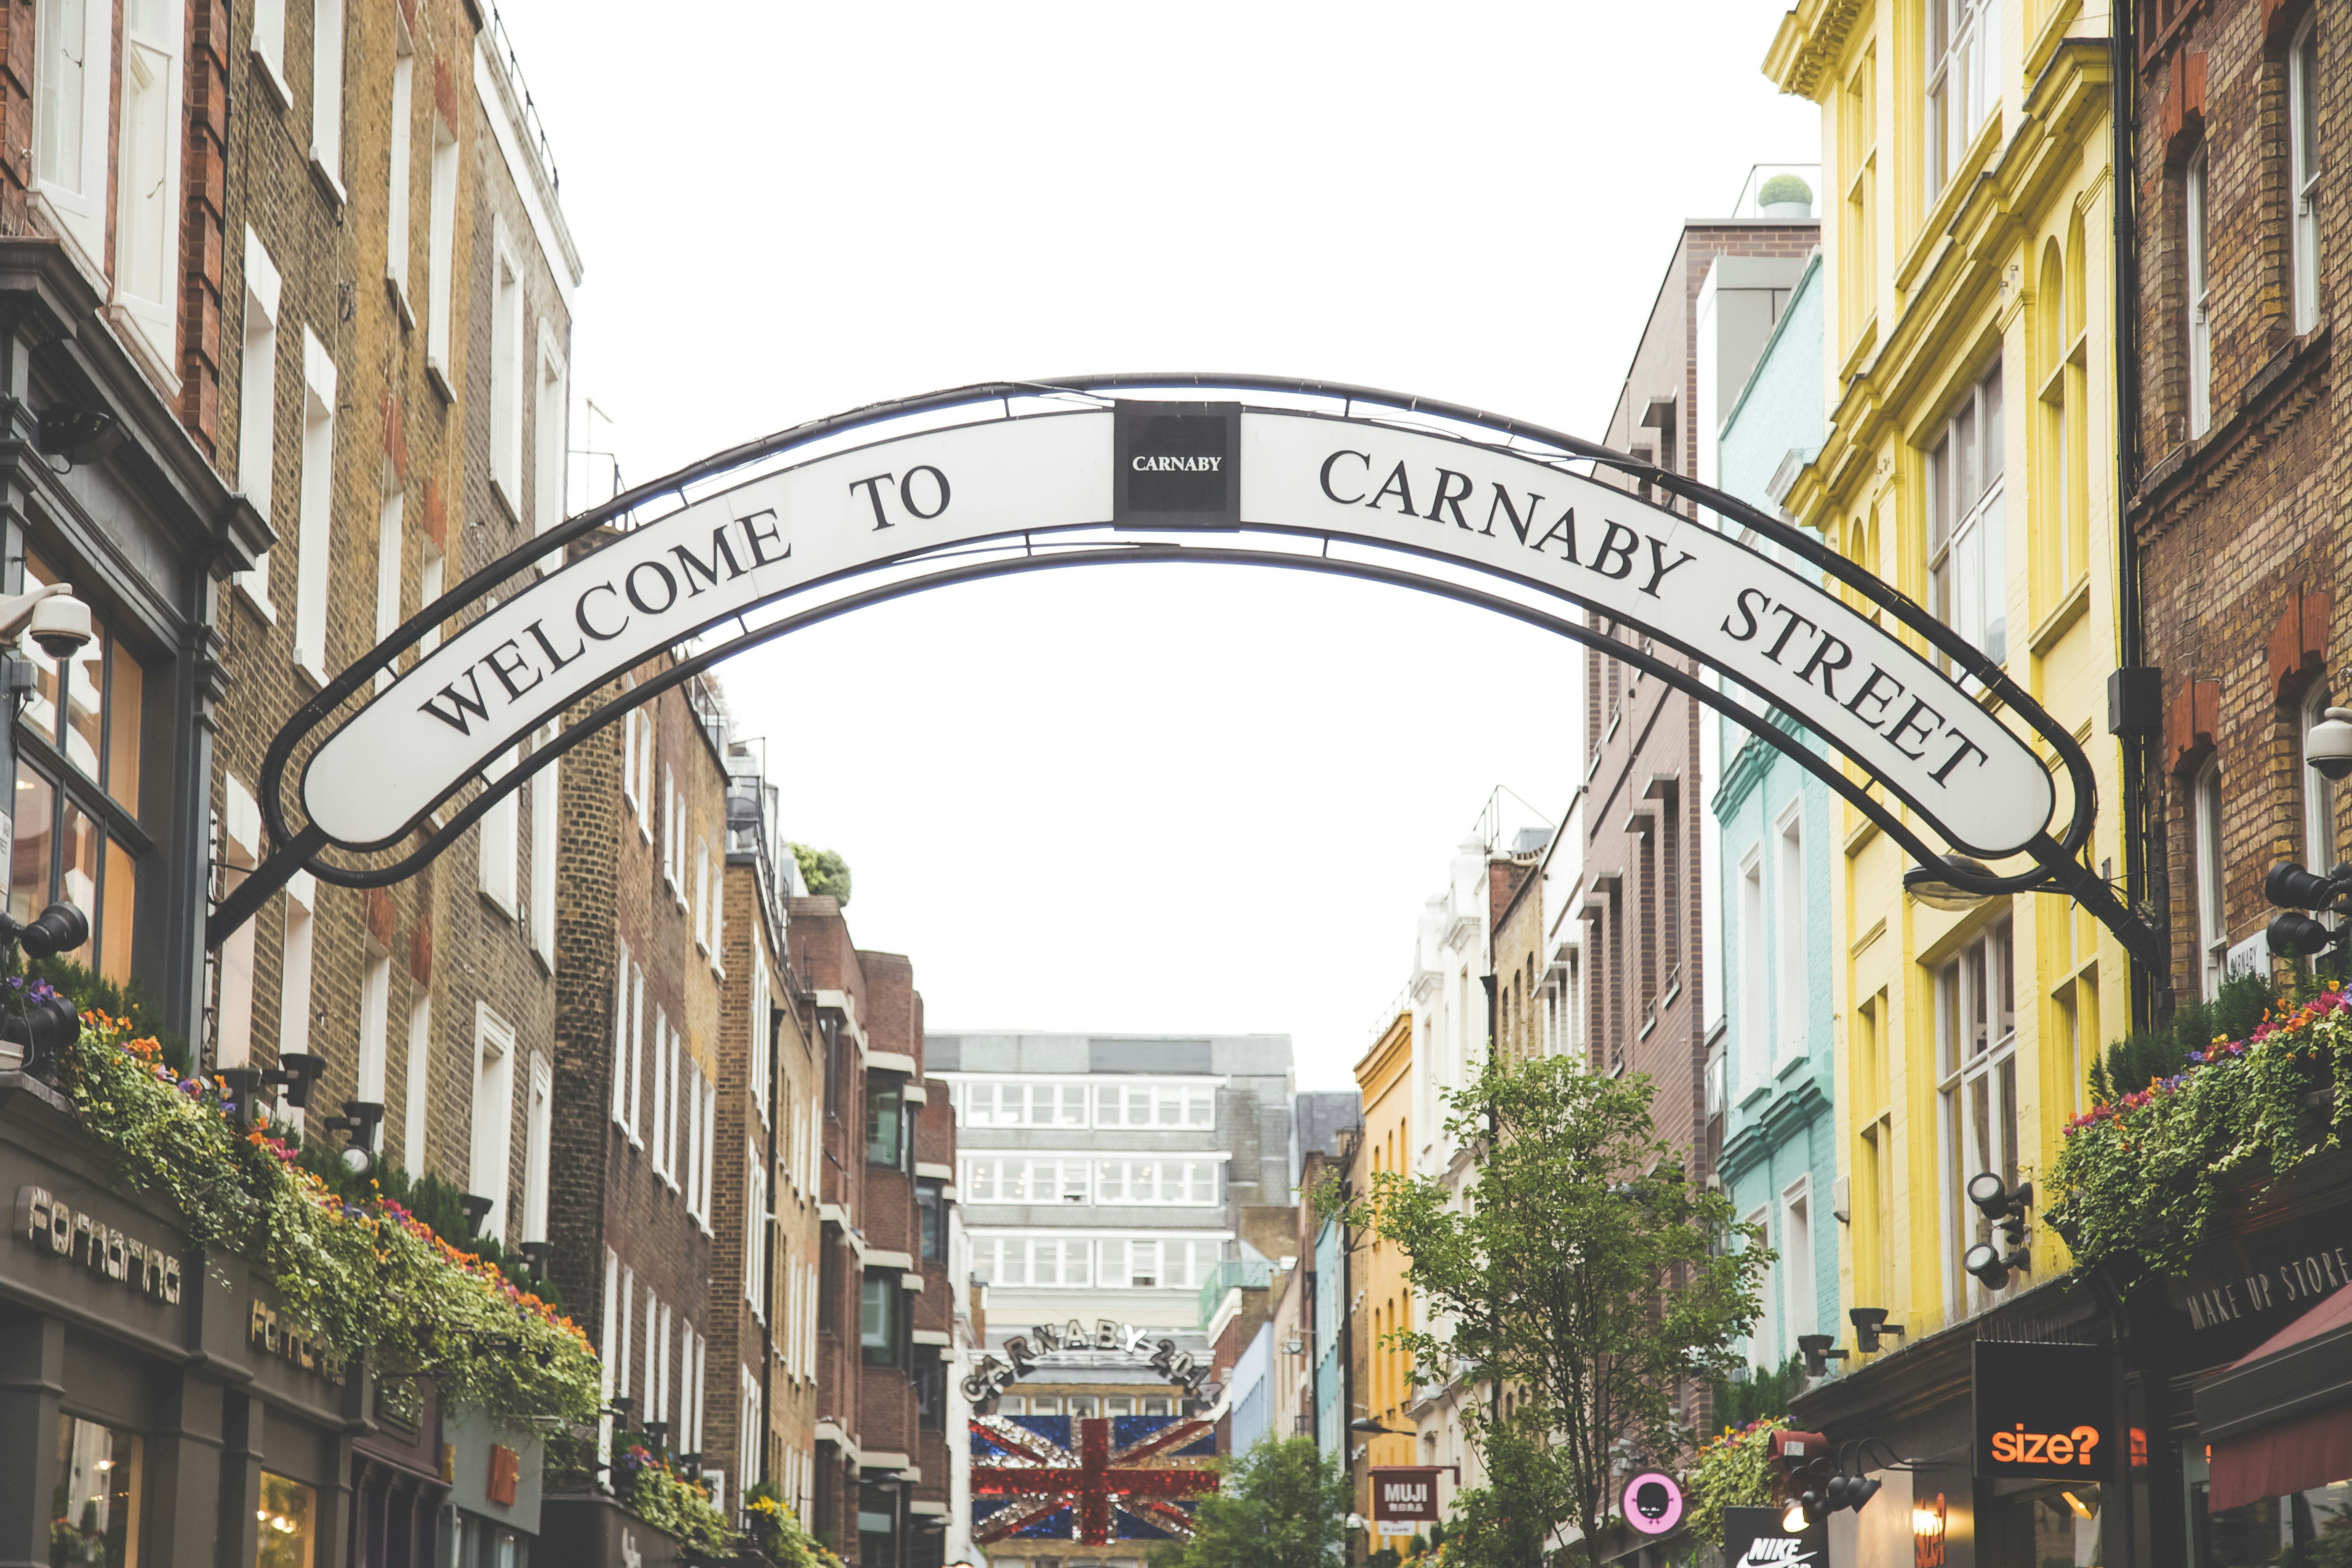 black and white Welcome to Carnaby Street signage